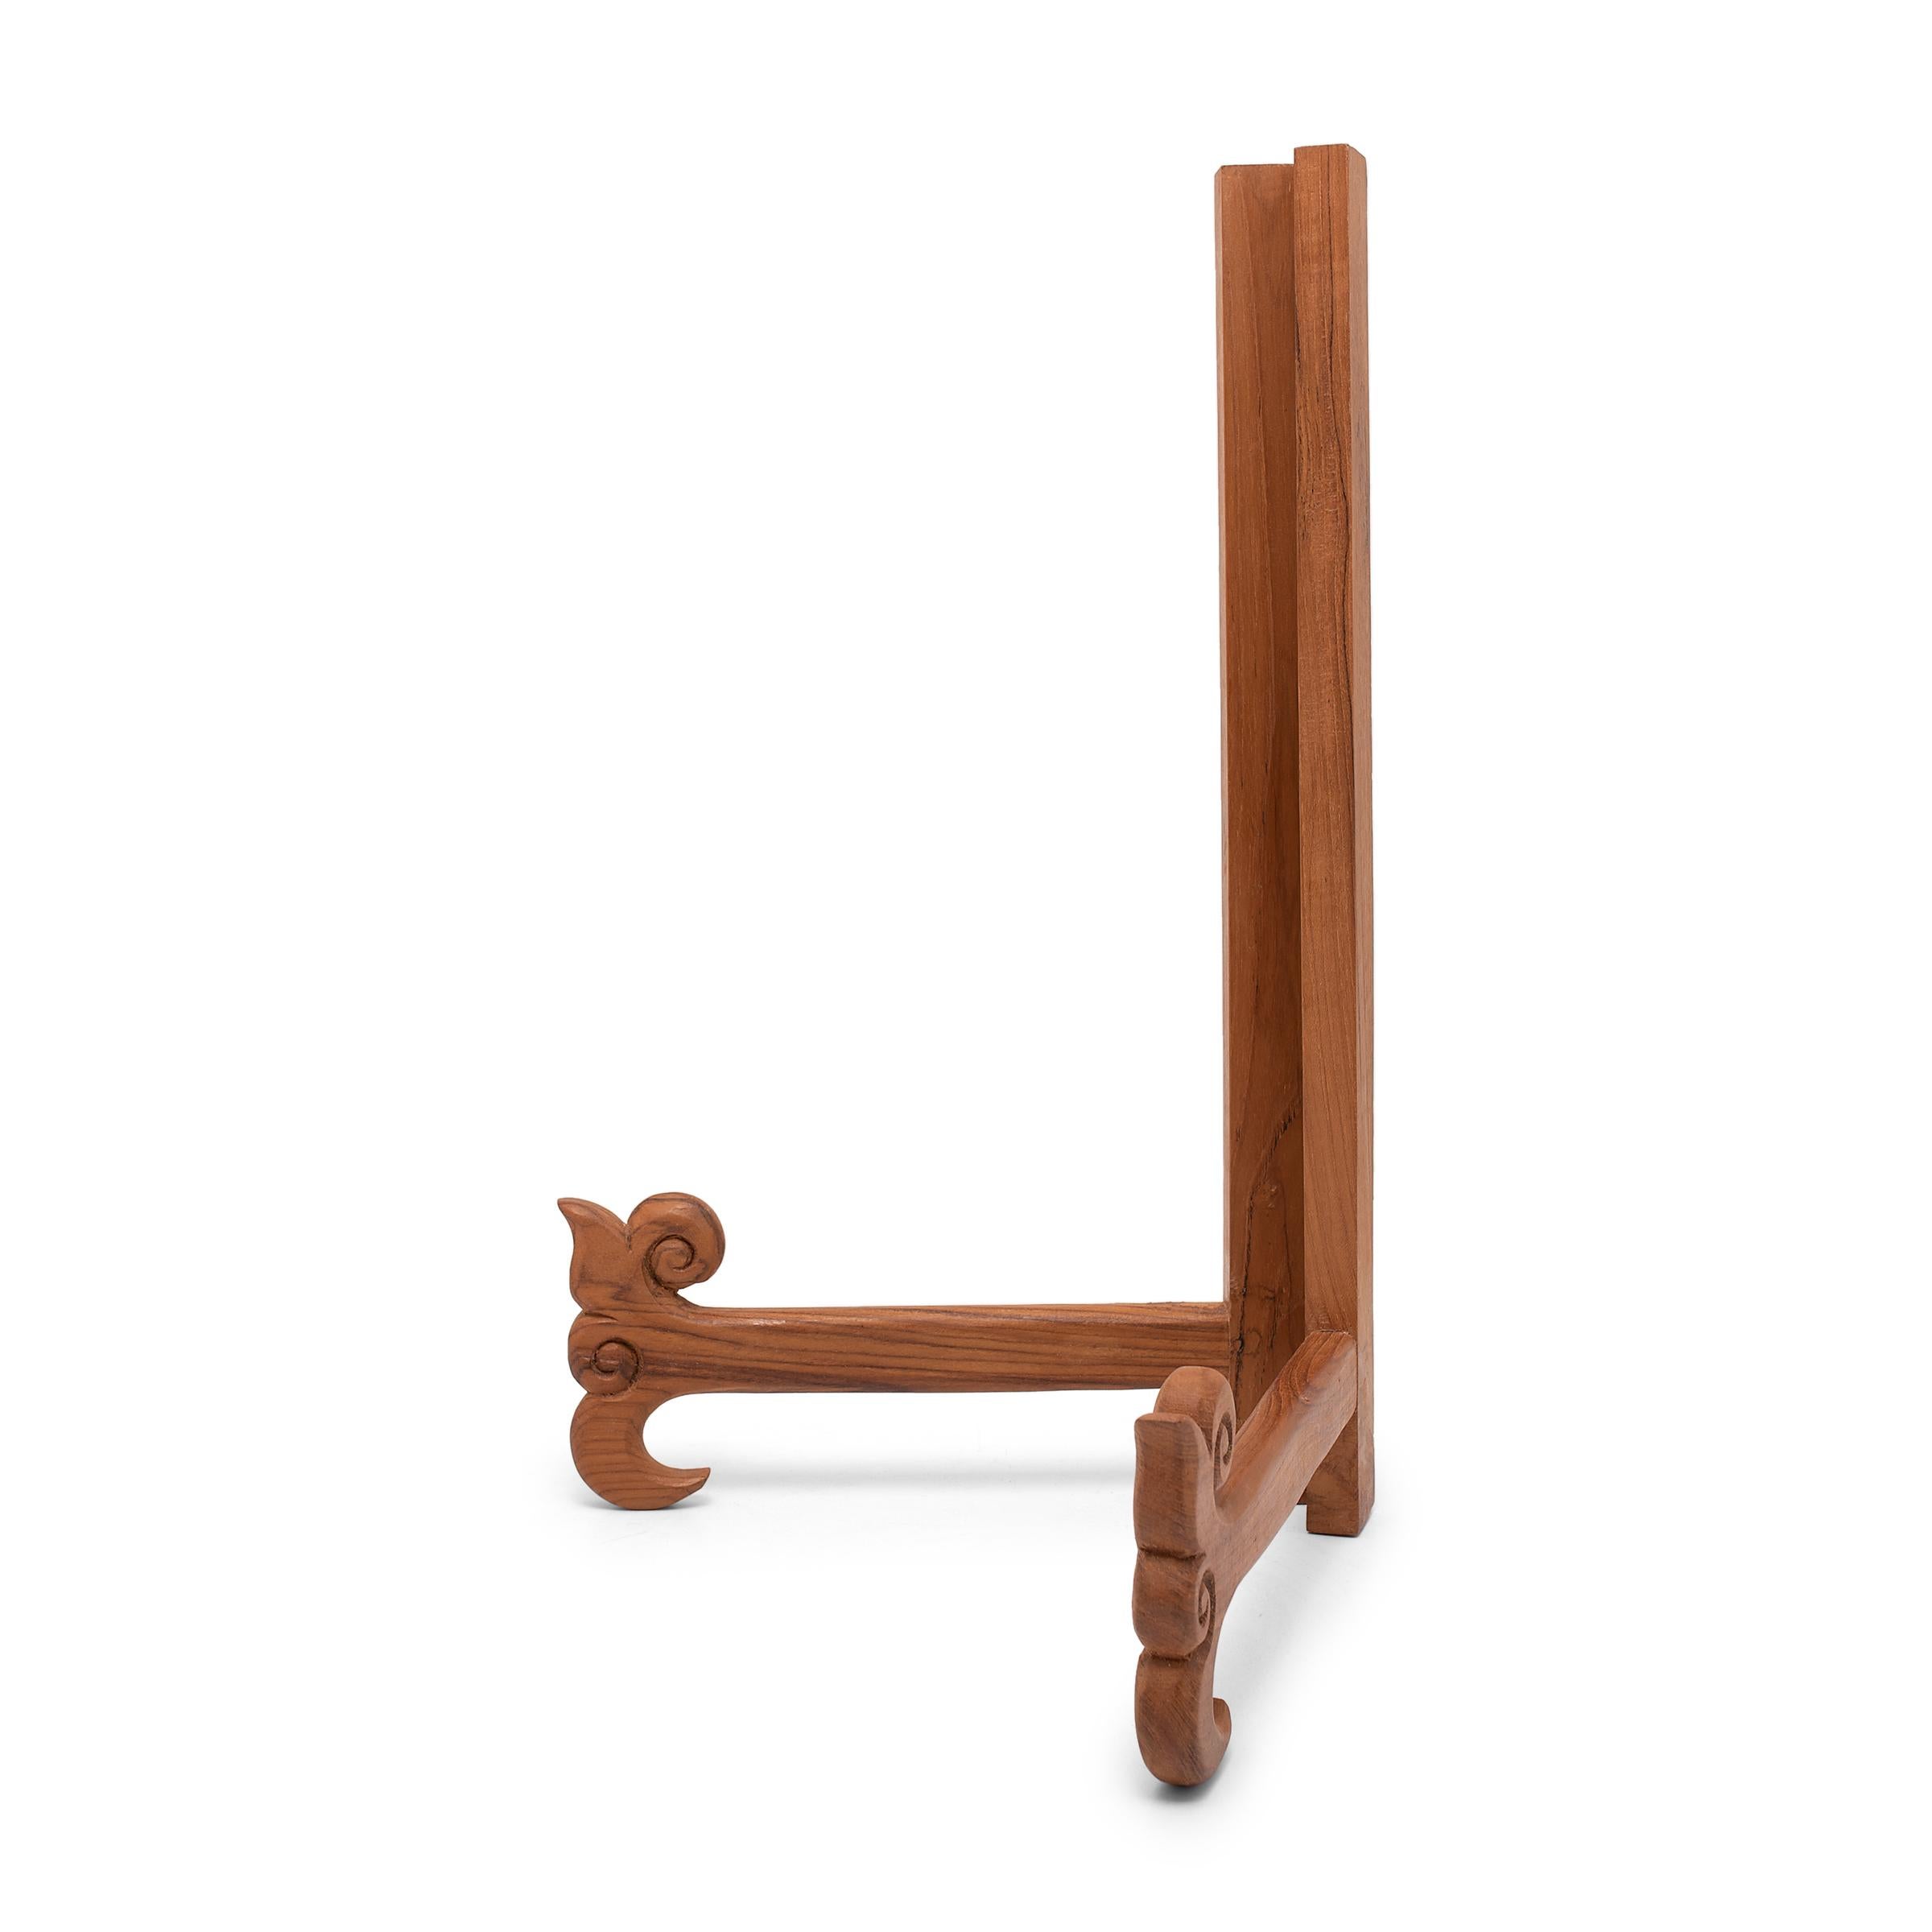 This wooden book stand is an elegant way to hold open a large book or display a work of art. The v-shaped book holder is connected by two hinges and stands on posts ending in scrollwork flourishes. Ideal for cookbooks in the kitchen or art books on